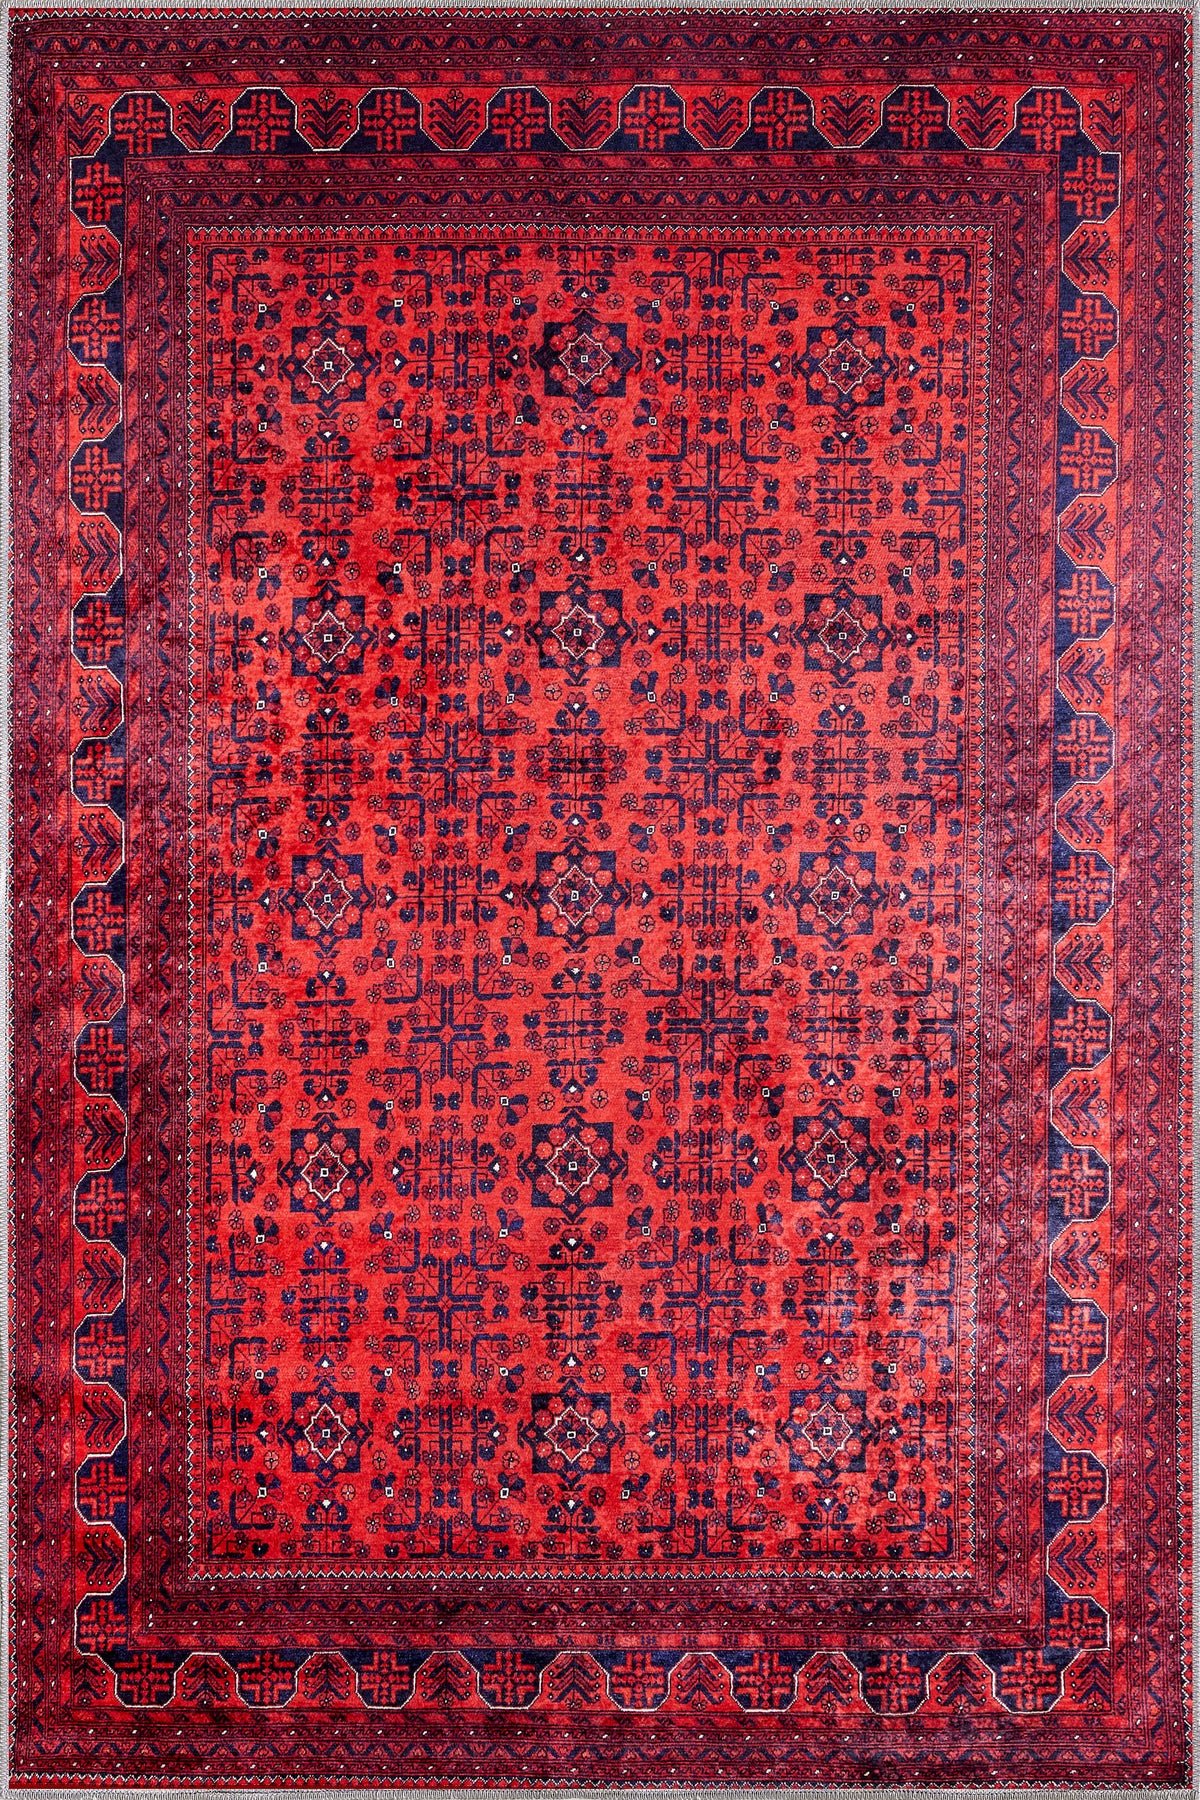 Red Old Fashioned Washable Rug - EA36